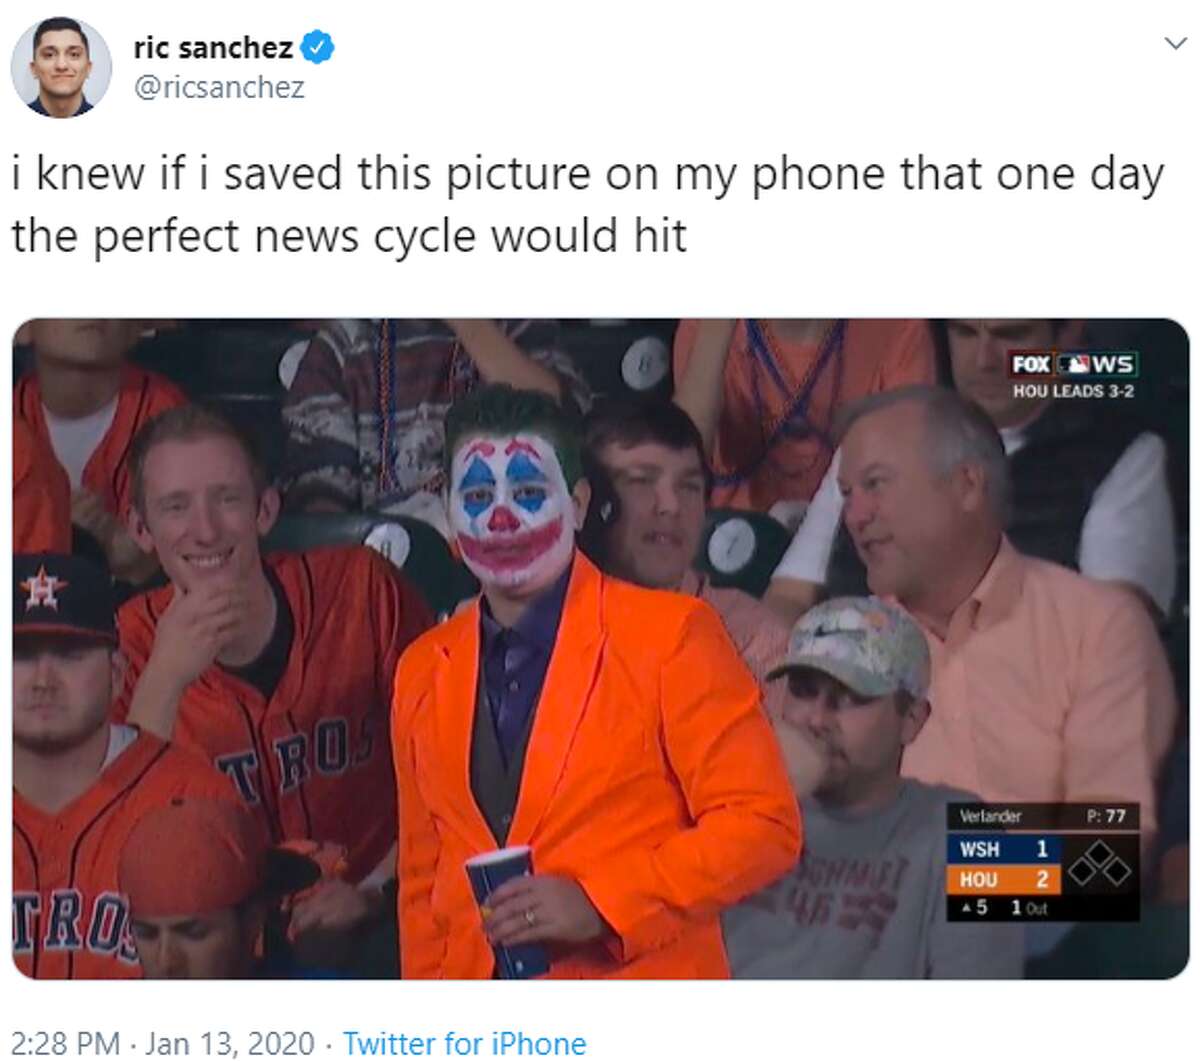 PHOTOS: The best memes from the Astros' housecleaning on Monday Source: Twitter.com/ricsanchez